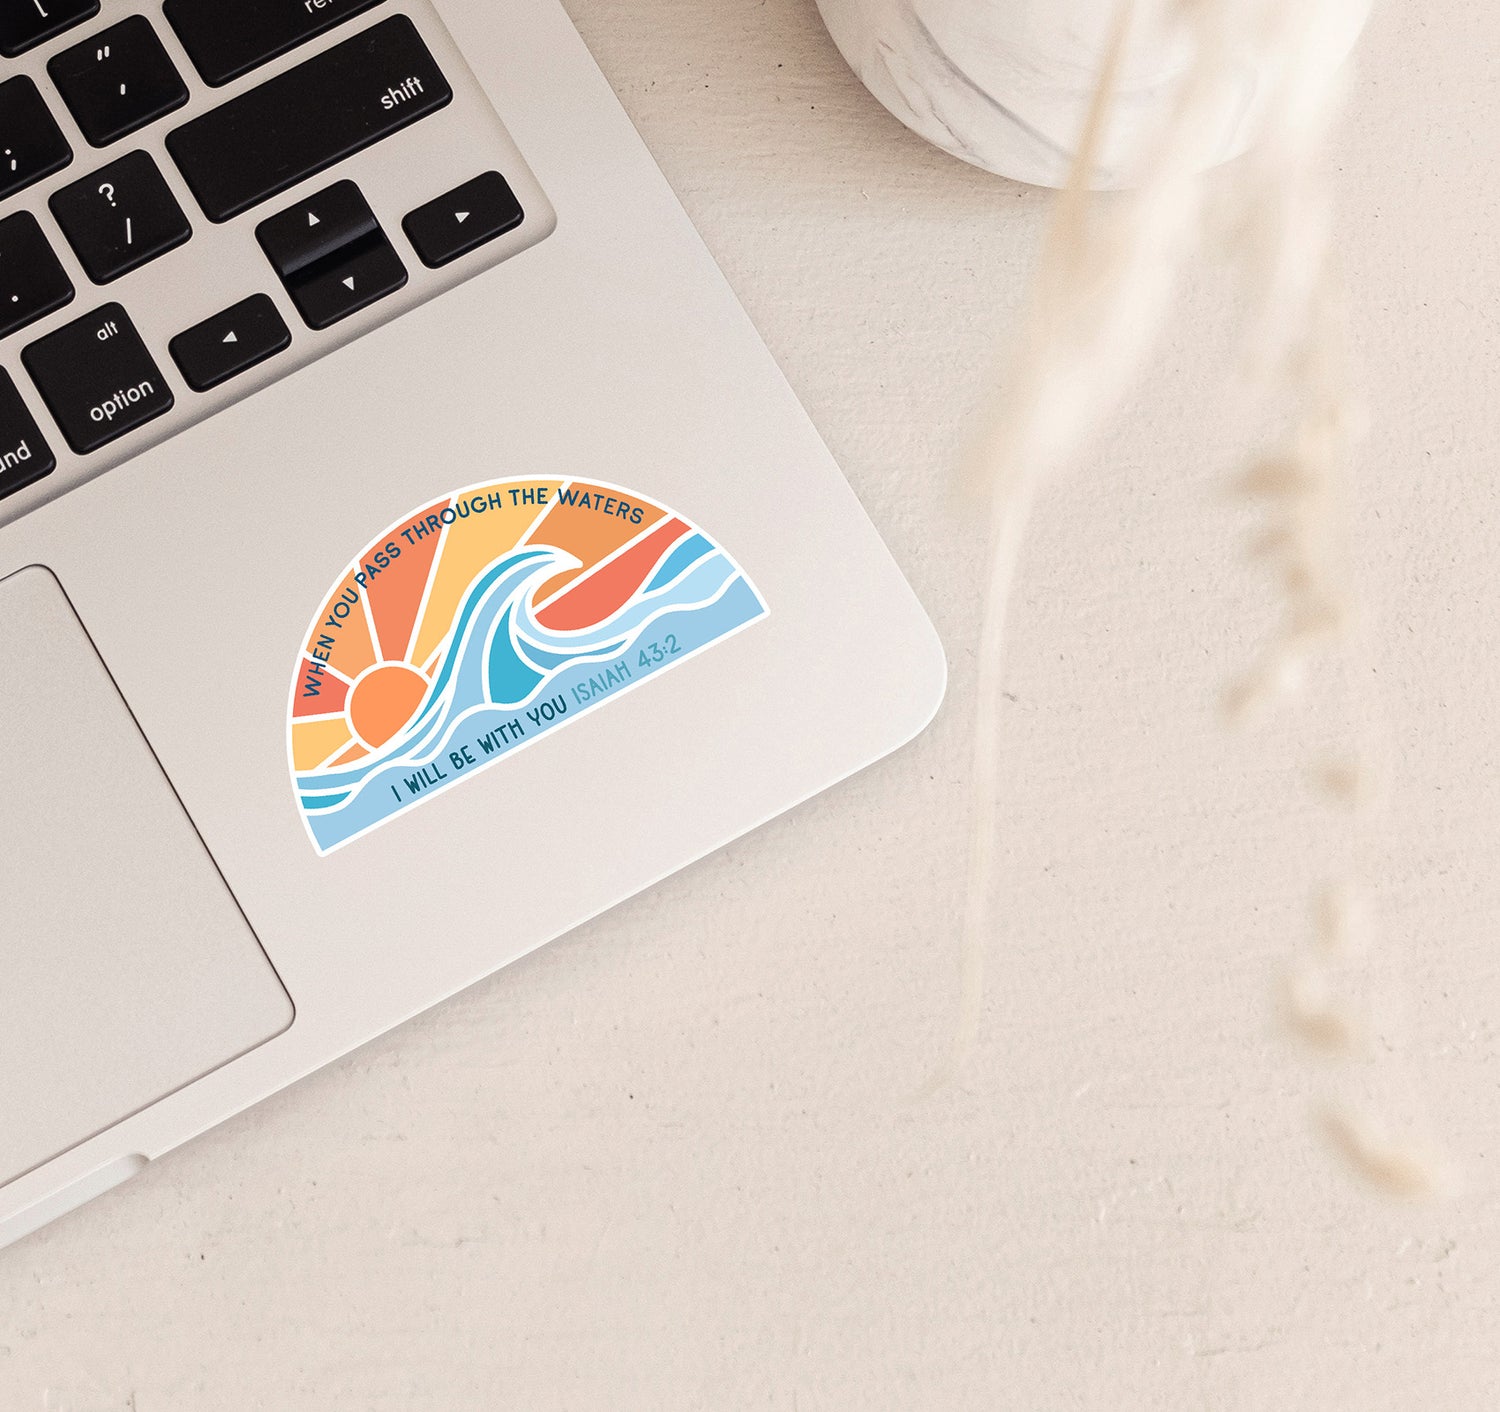 When You Pass Through The Waters, Isaiah 43:2 Bible verse laptop sticker with an ocean wave at sunset